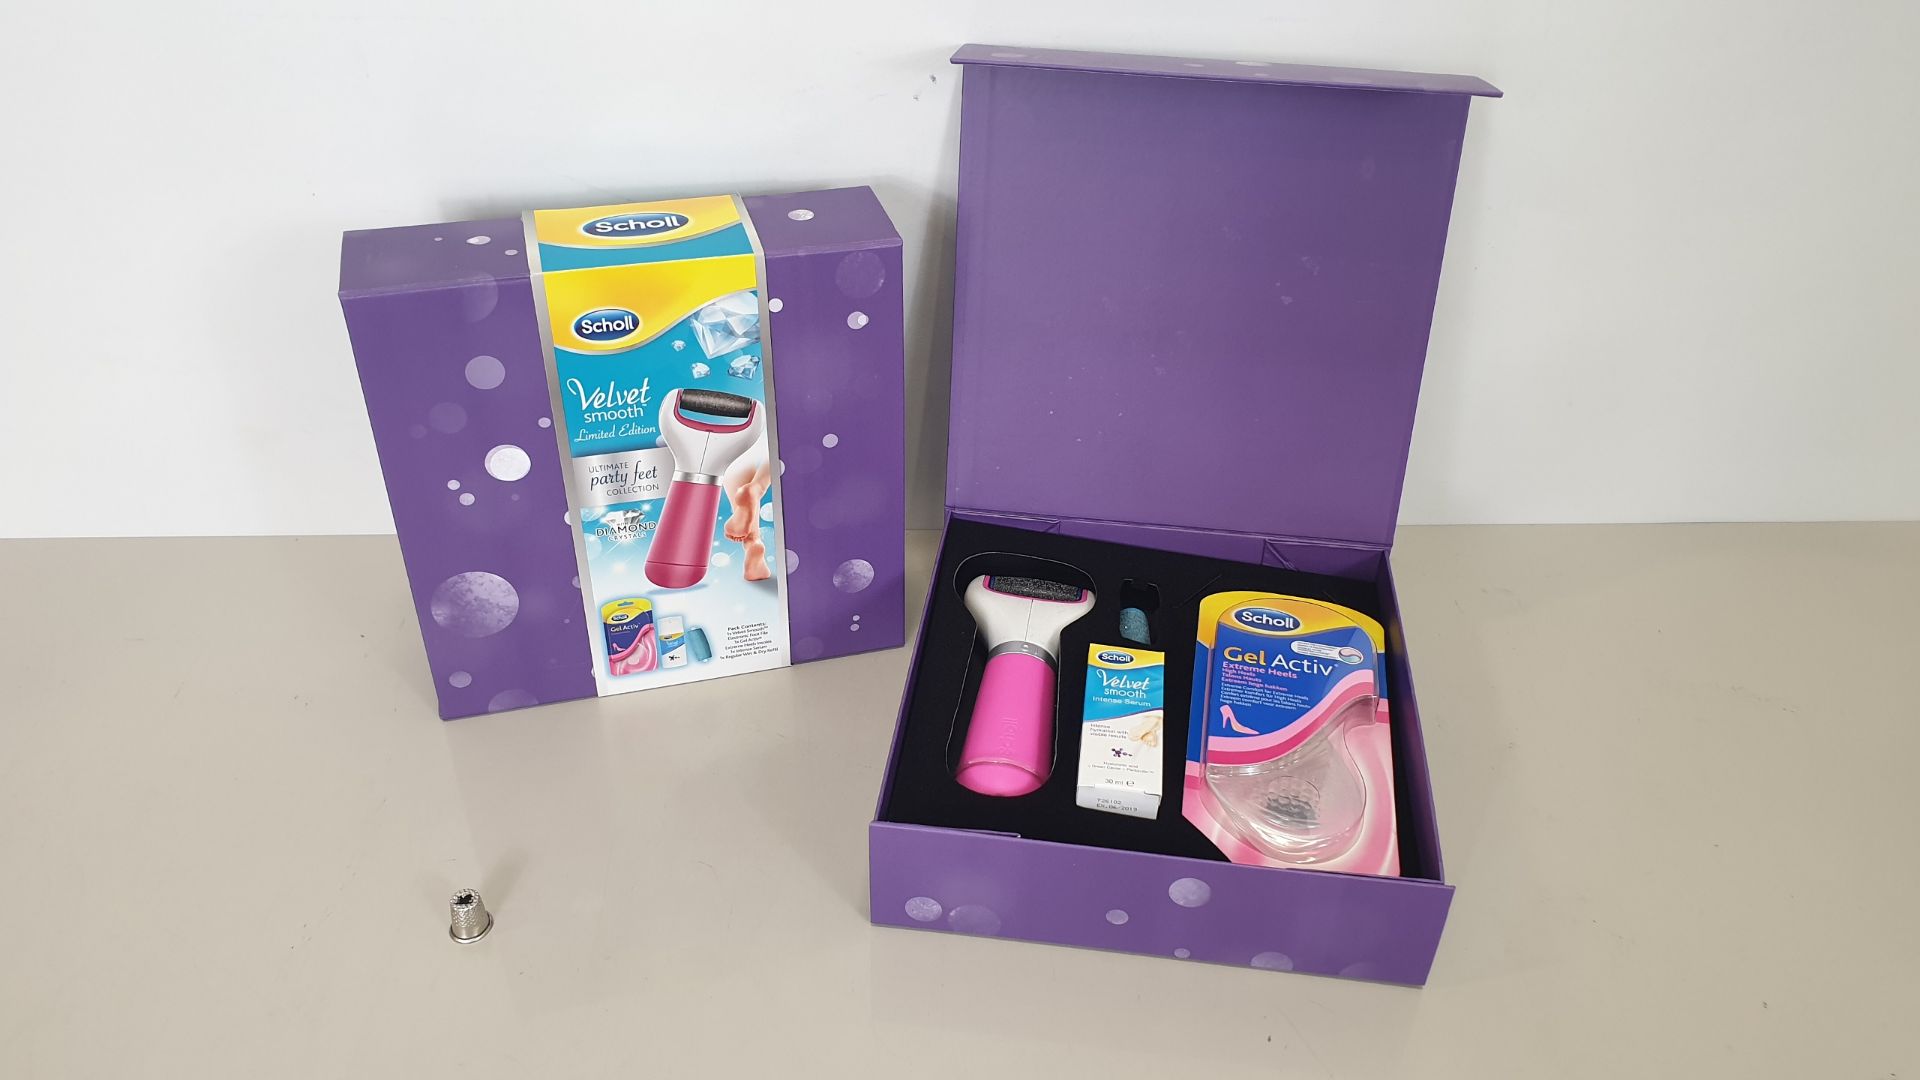 12 X BRAND NEW SCHOLL VELVET SMOOTH LIMITED EDITION ULTIMATE PARTY FEET COLLECTION - SERUM EXPIRY